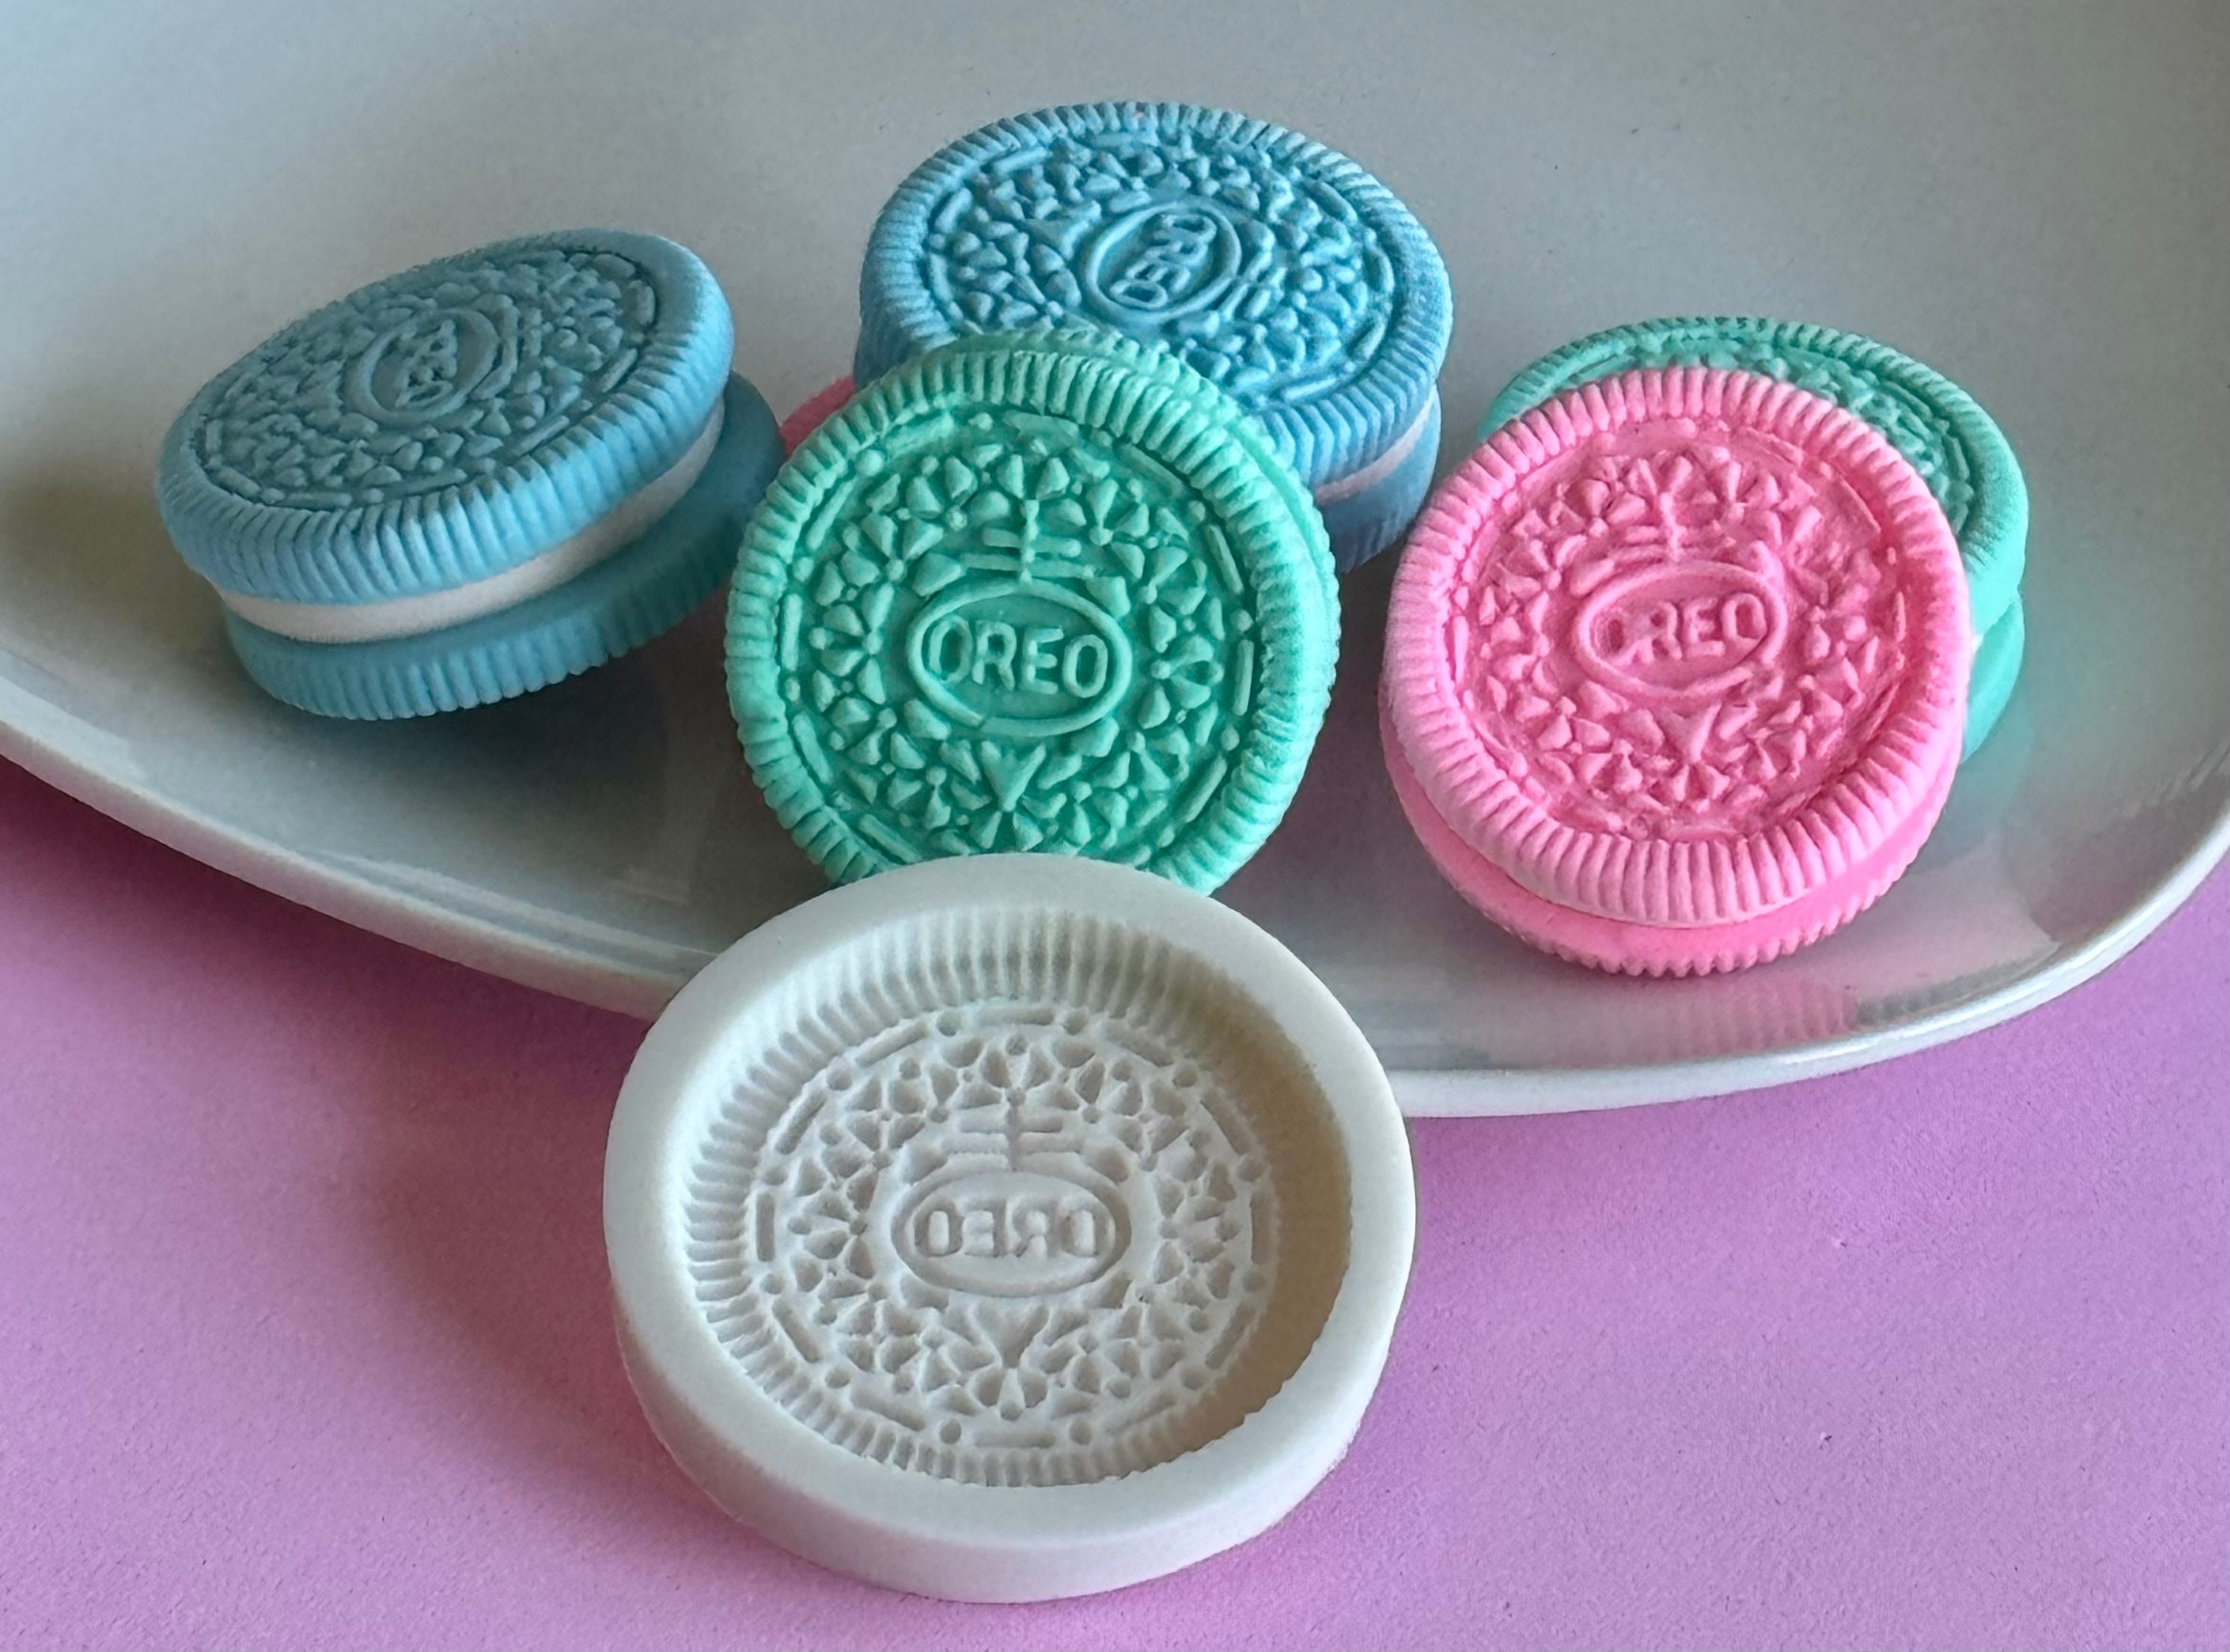 Buy Ocmoiy 2 Inch Round Silicone Mold for Oreo Chocolate Covered